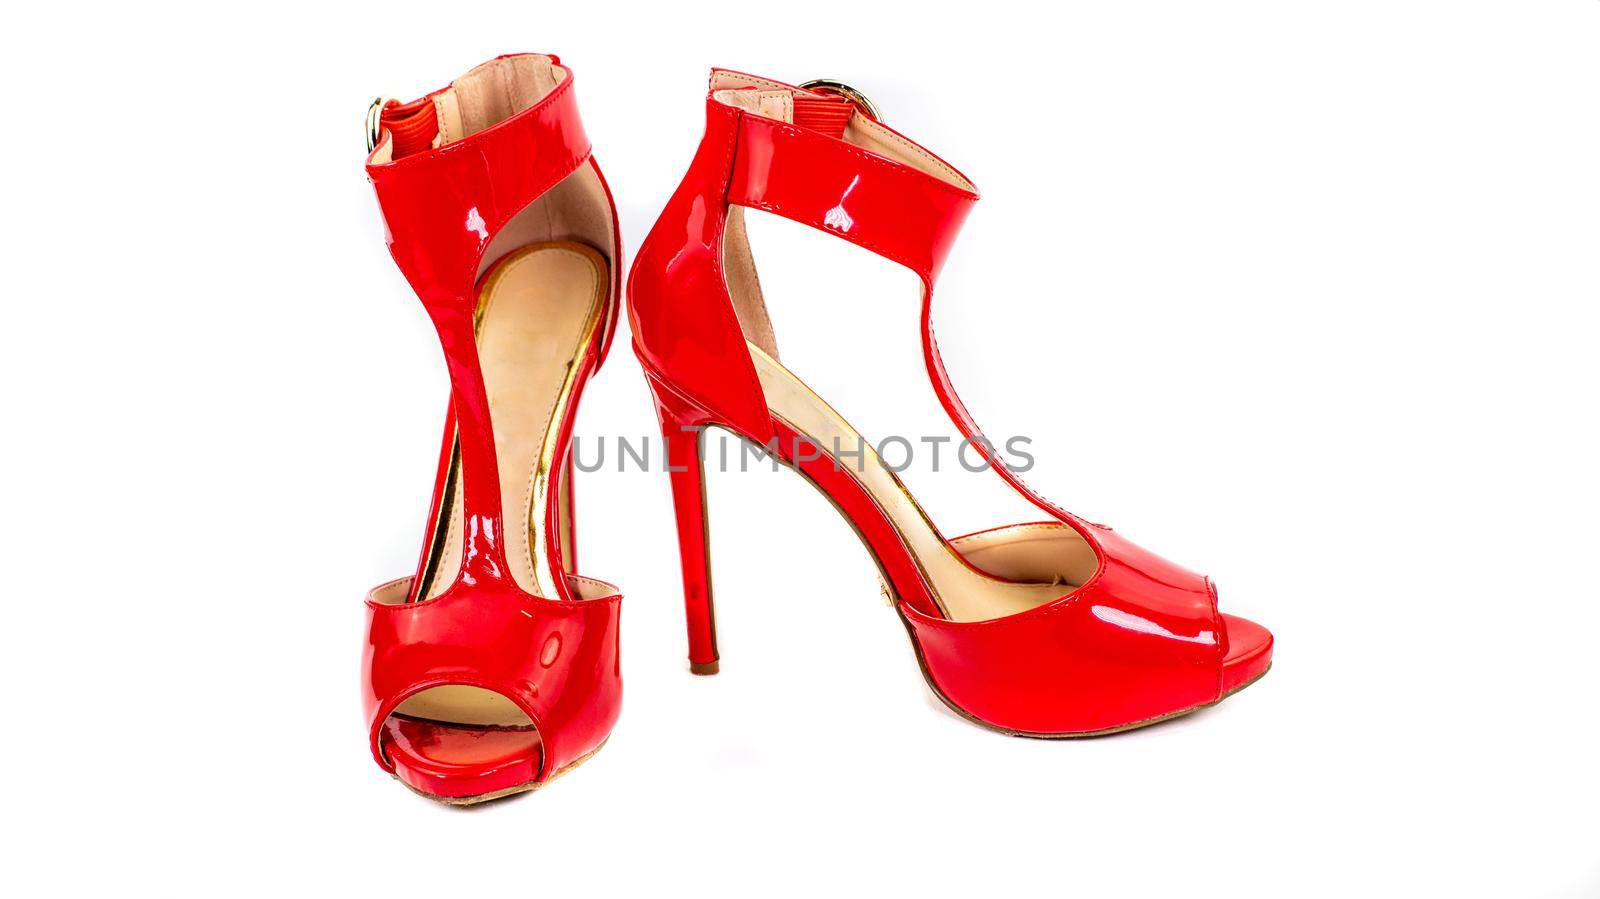 sandal with red patent heel by carfedeph